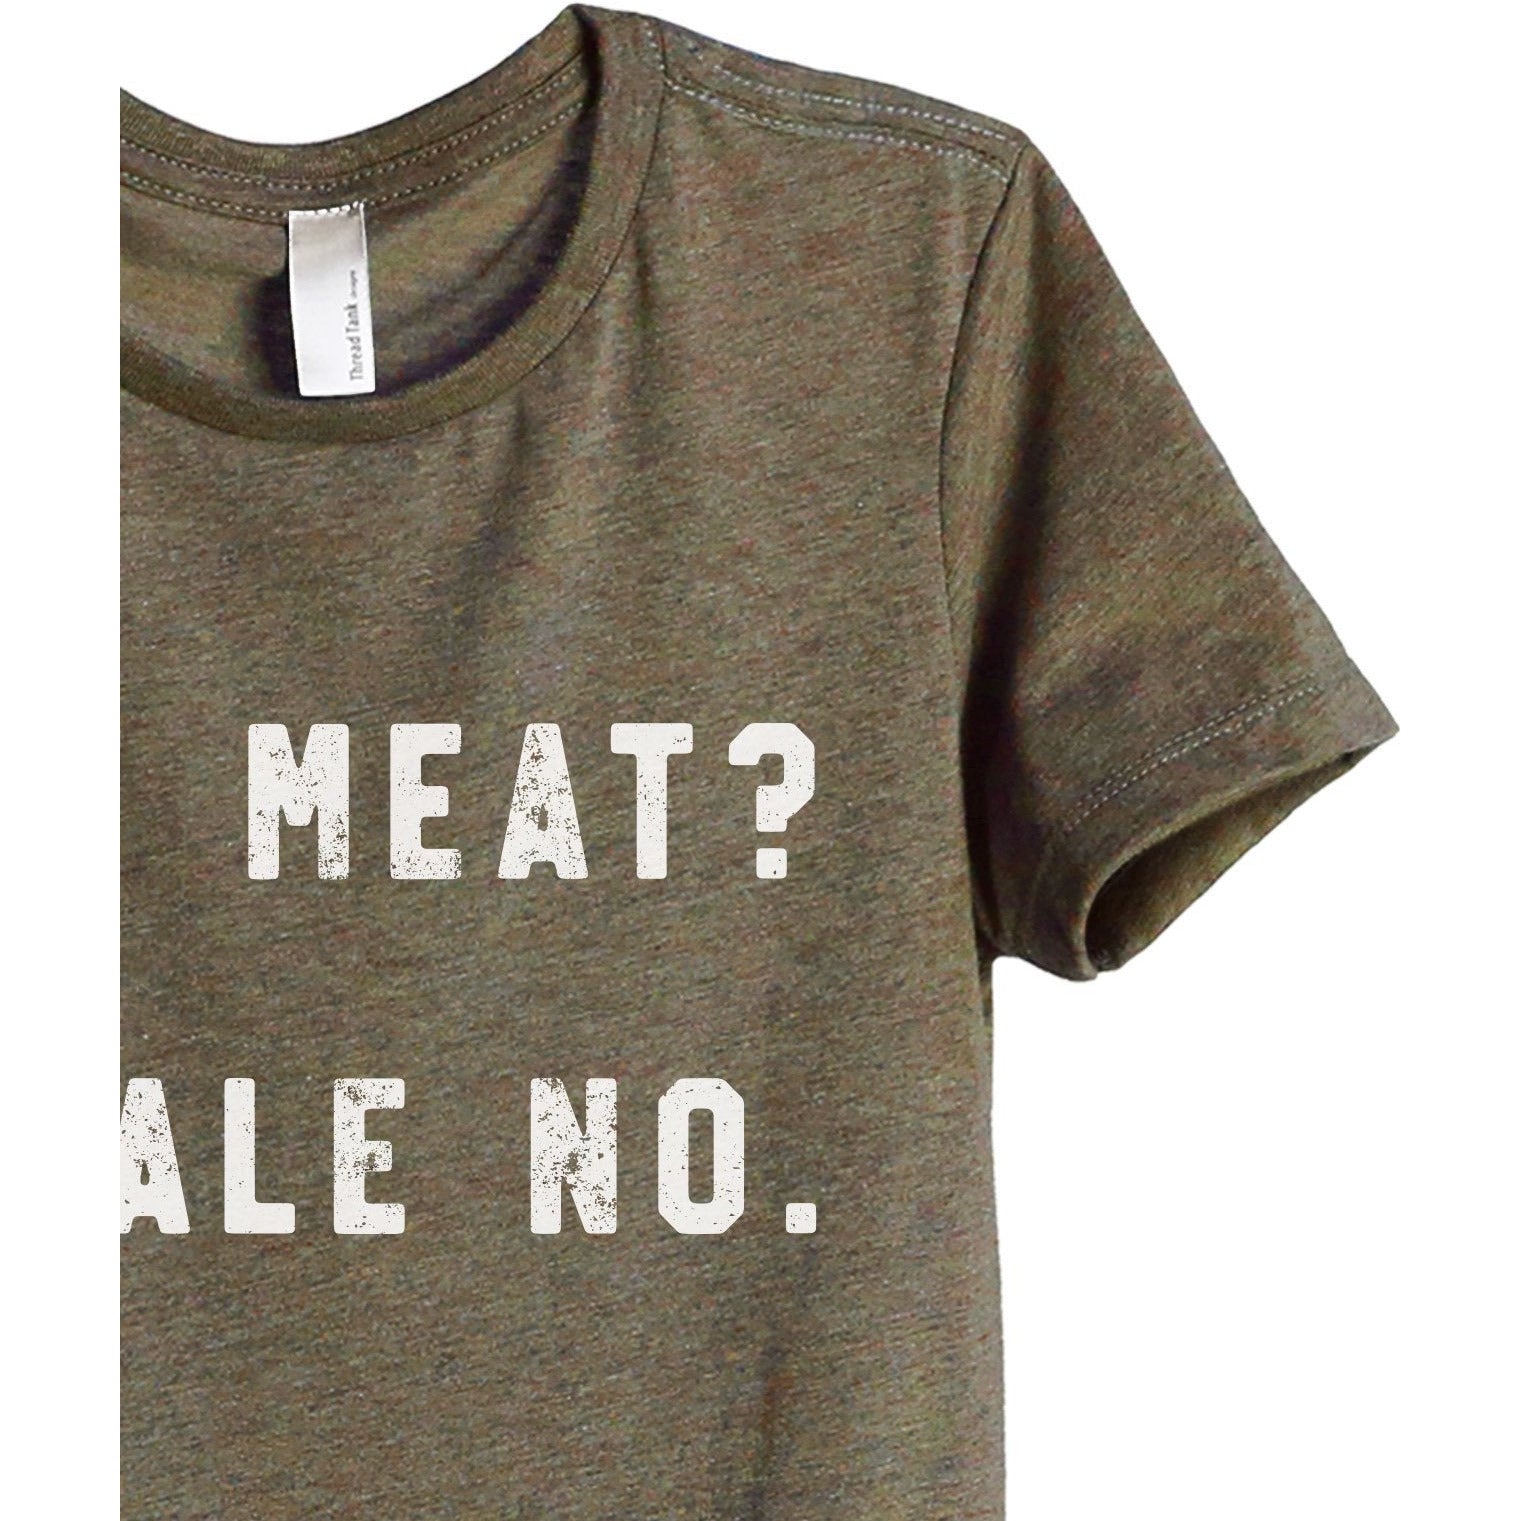 Eat Meat Kale No Women's Relaxed Crewneck T-Shirt Top Tee Heather Sage Zoom Details